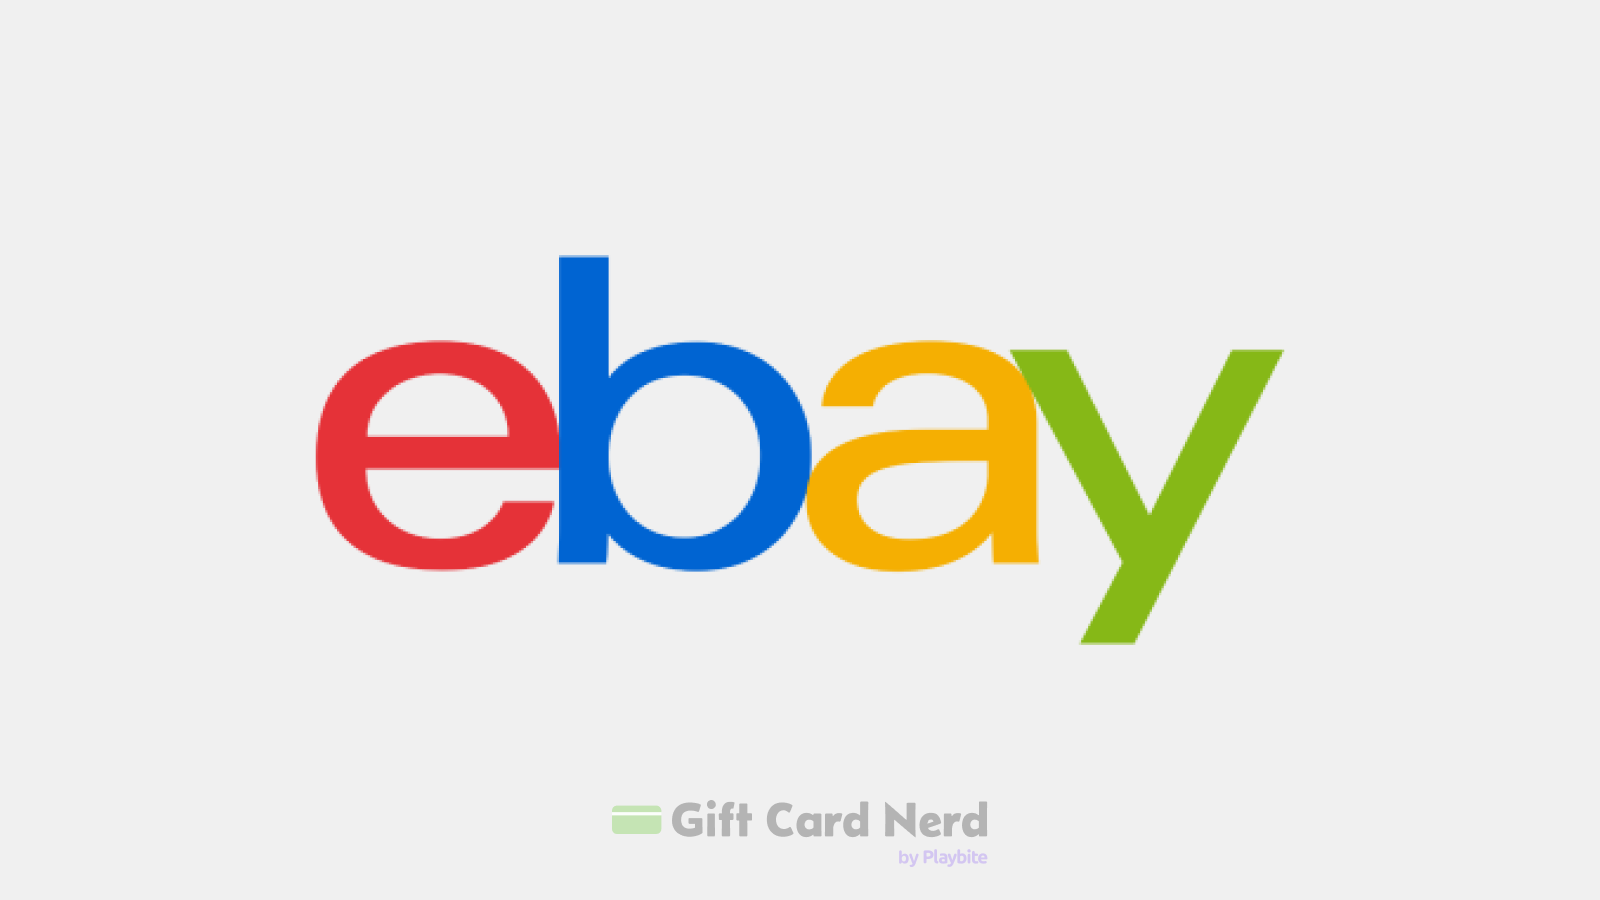 Can I Use an eBay Gift Card on Roblox?